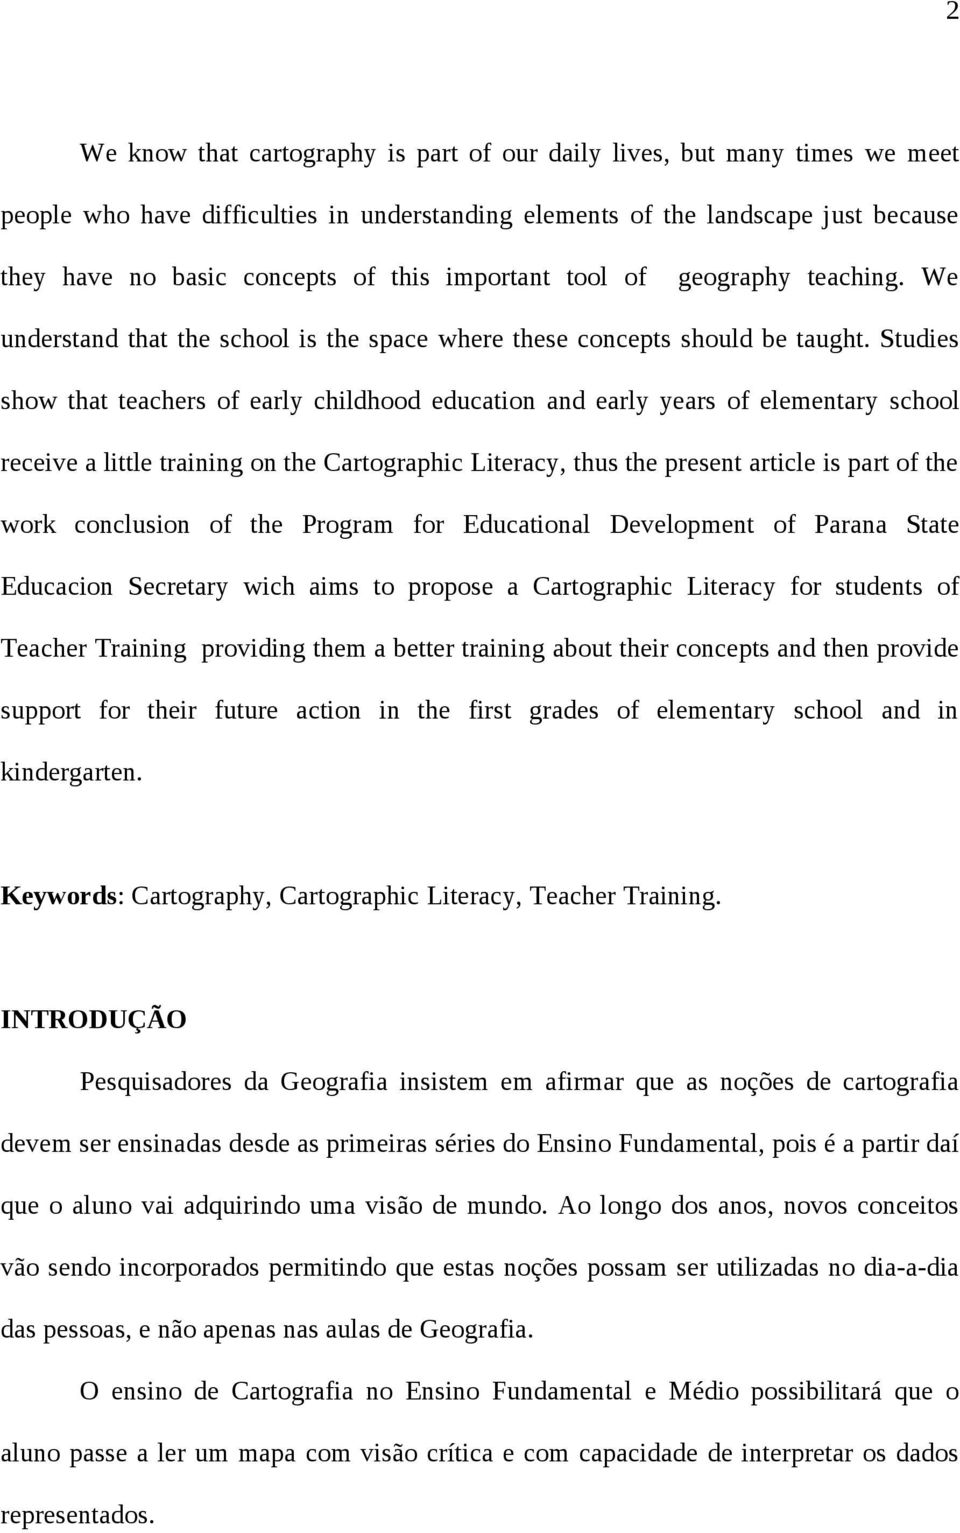 Studies show that teachers of early childhood education and early years of elementary school receive a little training on the Cartographic Literacy, thus the present article is part of the work